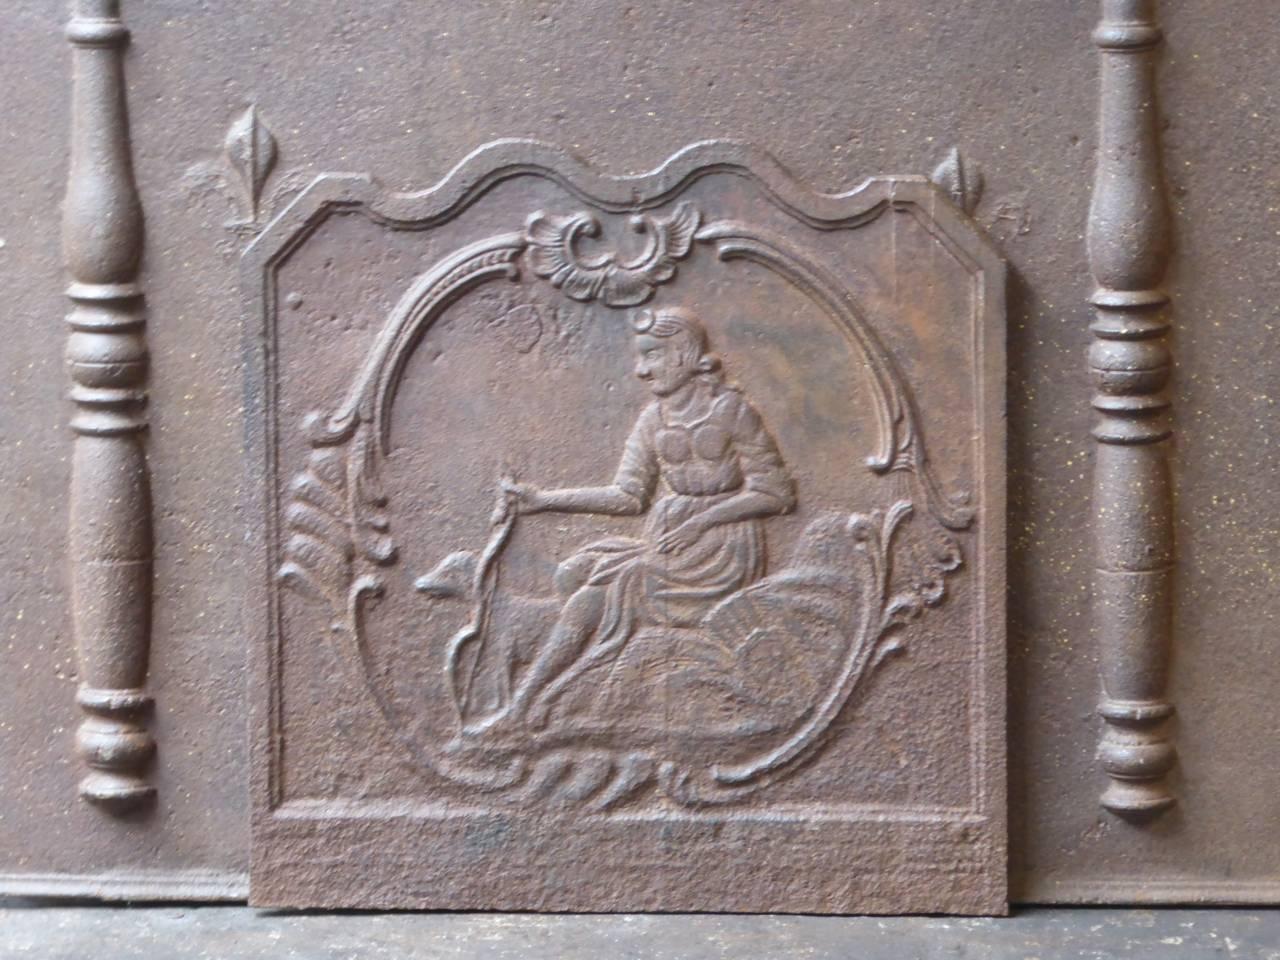 19th century French fireplace fireback with the goddess Diana. Goddess of hunting, also protector of animals of the forest, especially the young animals. She experienced great pleasure in hunting, but took care that she did not kill more animals